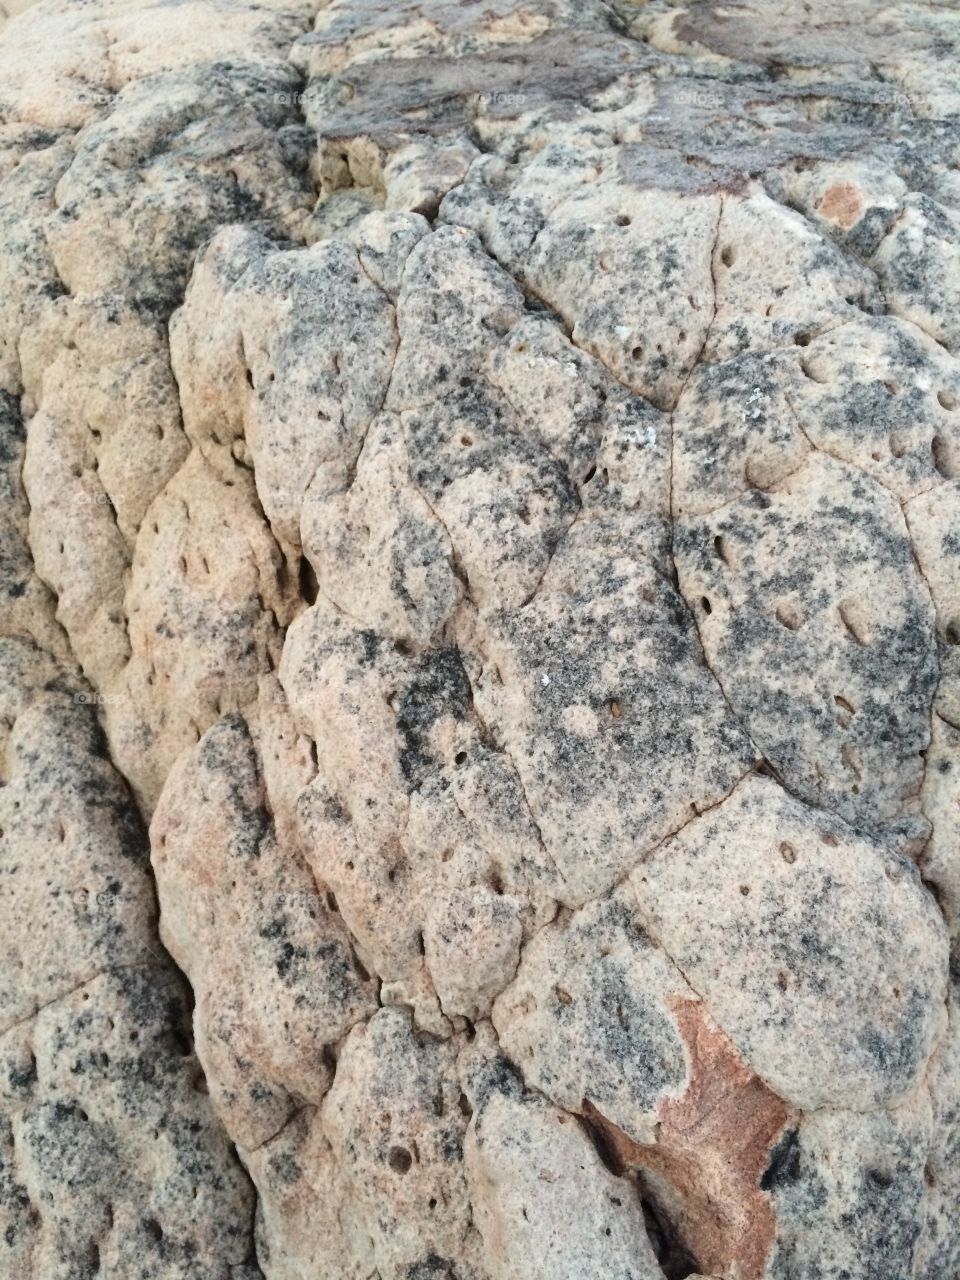 Hiking rock formation with variable texture